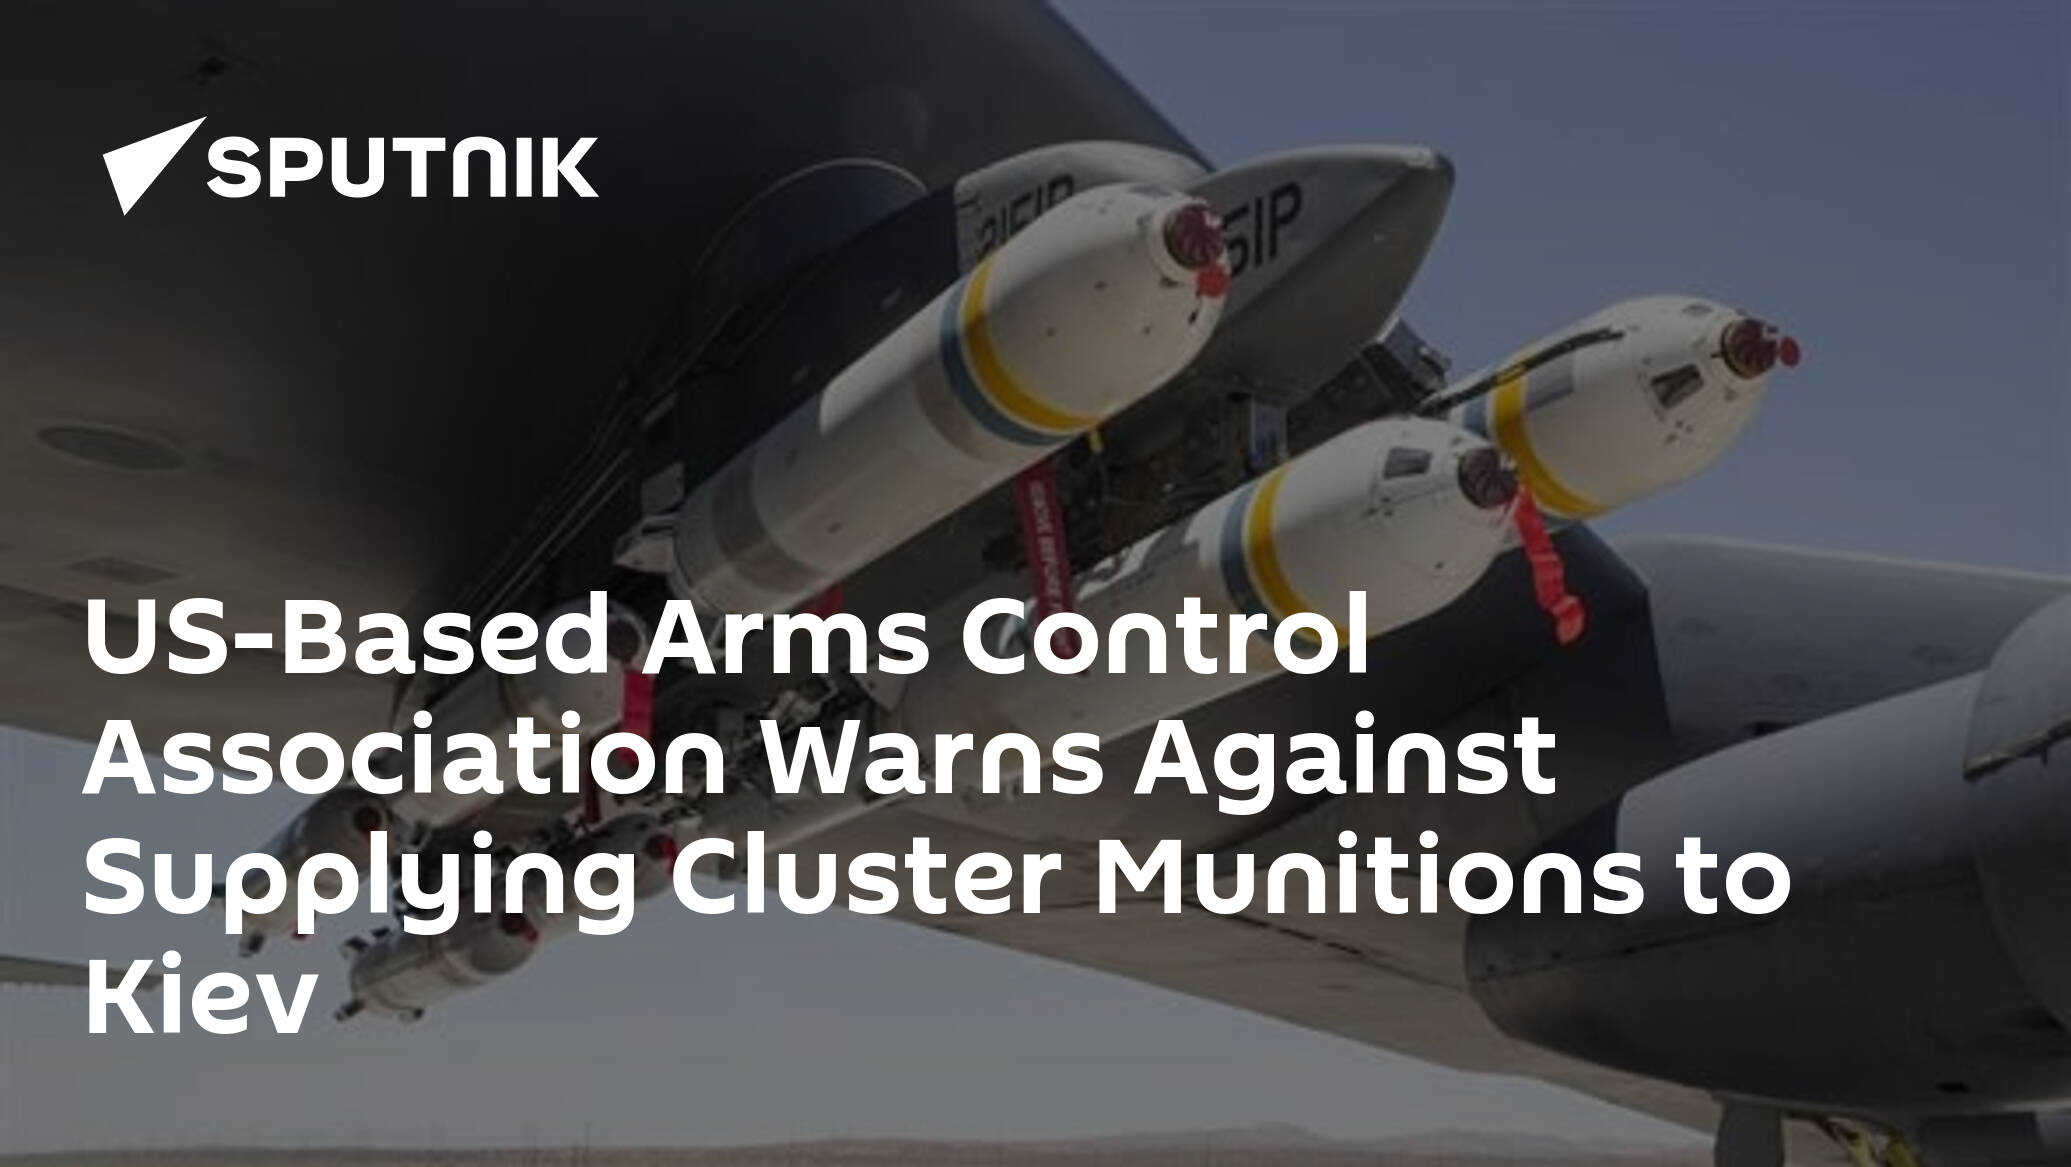 US-Based Arms Control Association Warns Against Supplying Cluster Munitions to Kiev